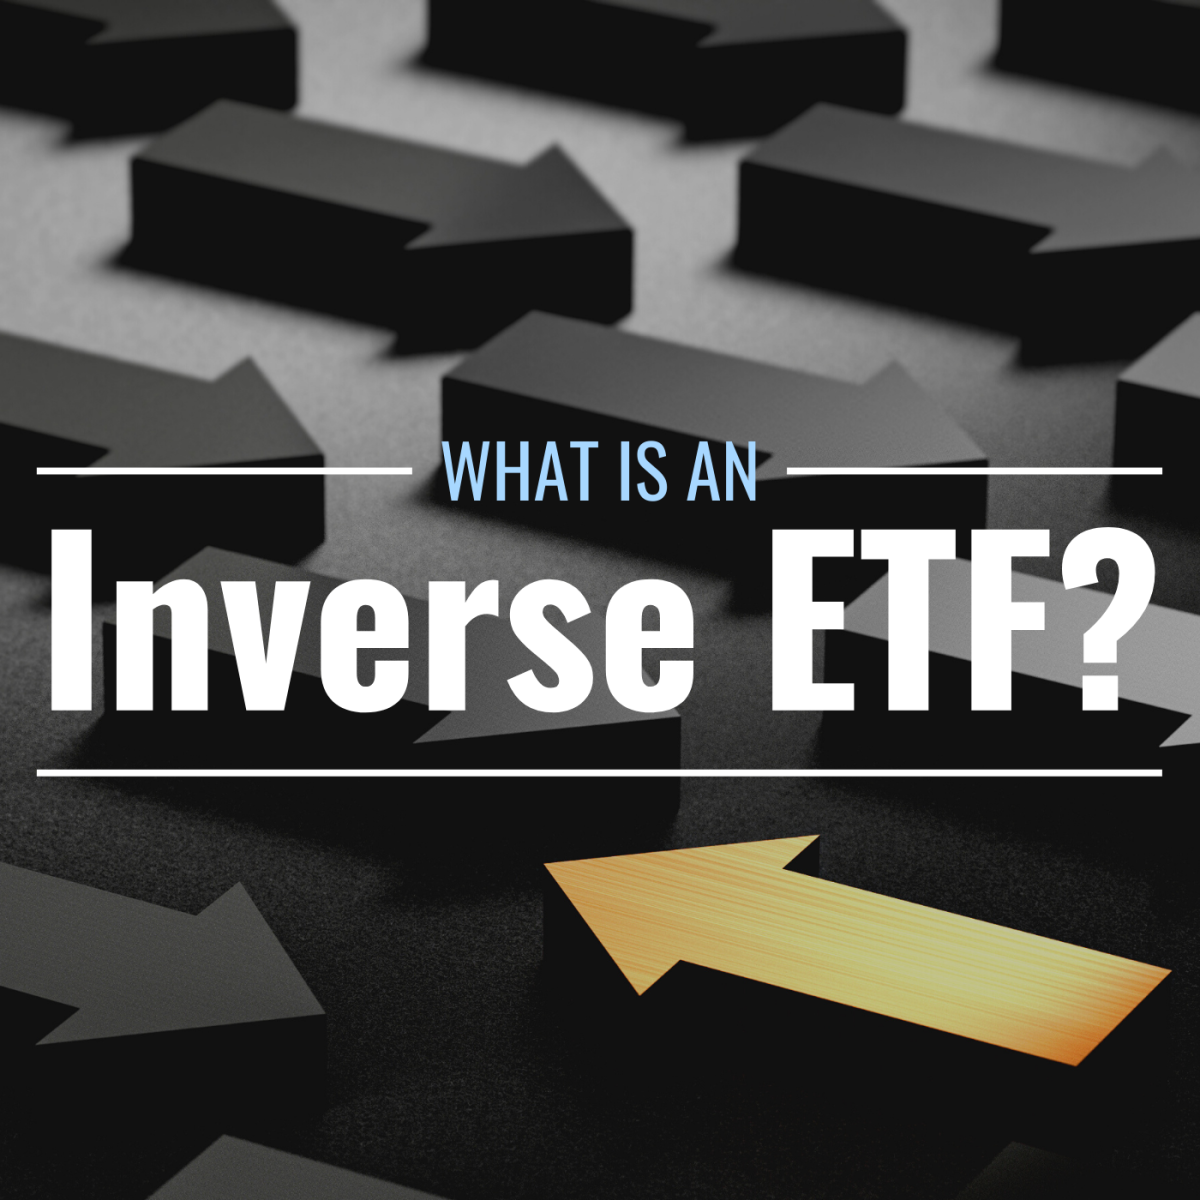 Darkened image of many black arrows pointing in one direction and a single gold arrow pointing in the opposite direction with text overlay that reads "What Is an Inverse ETF?"